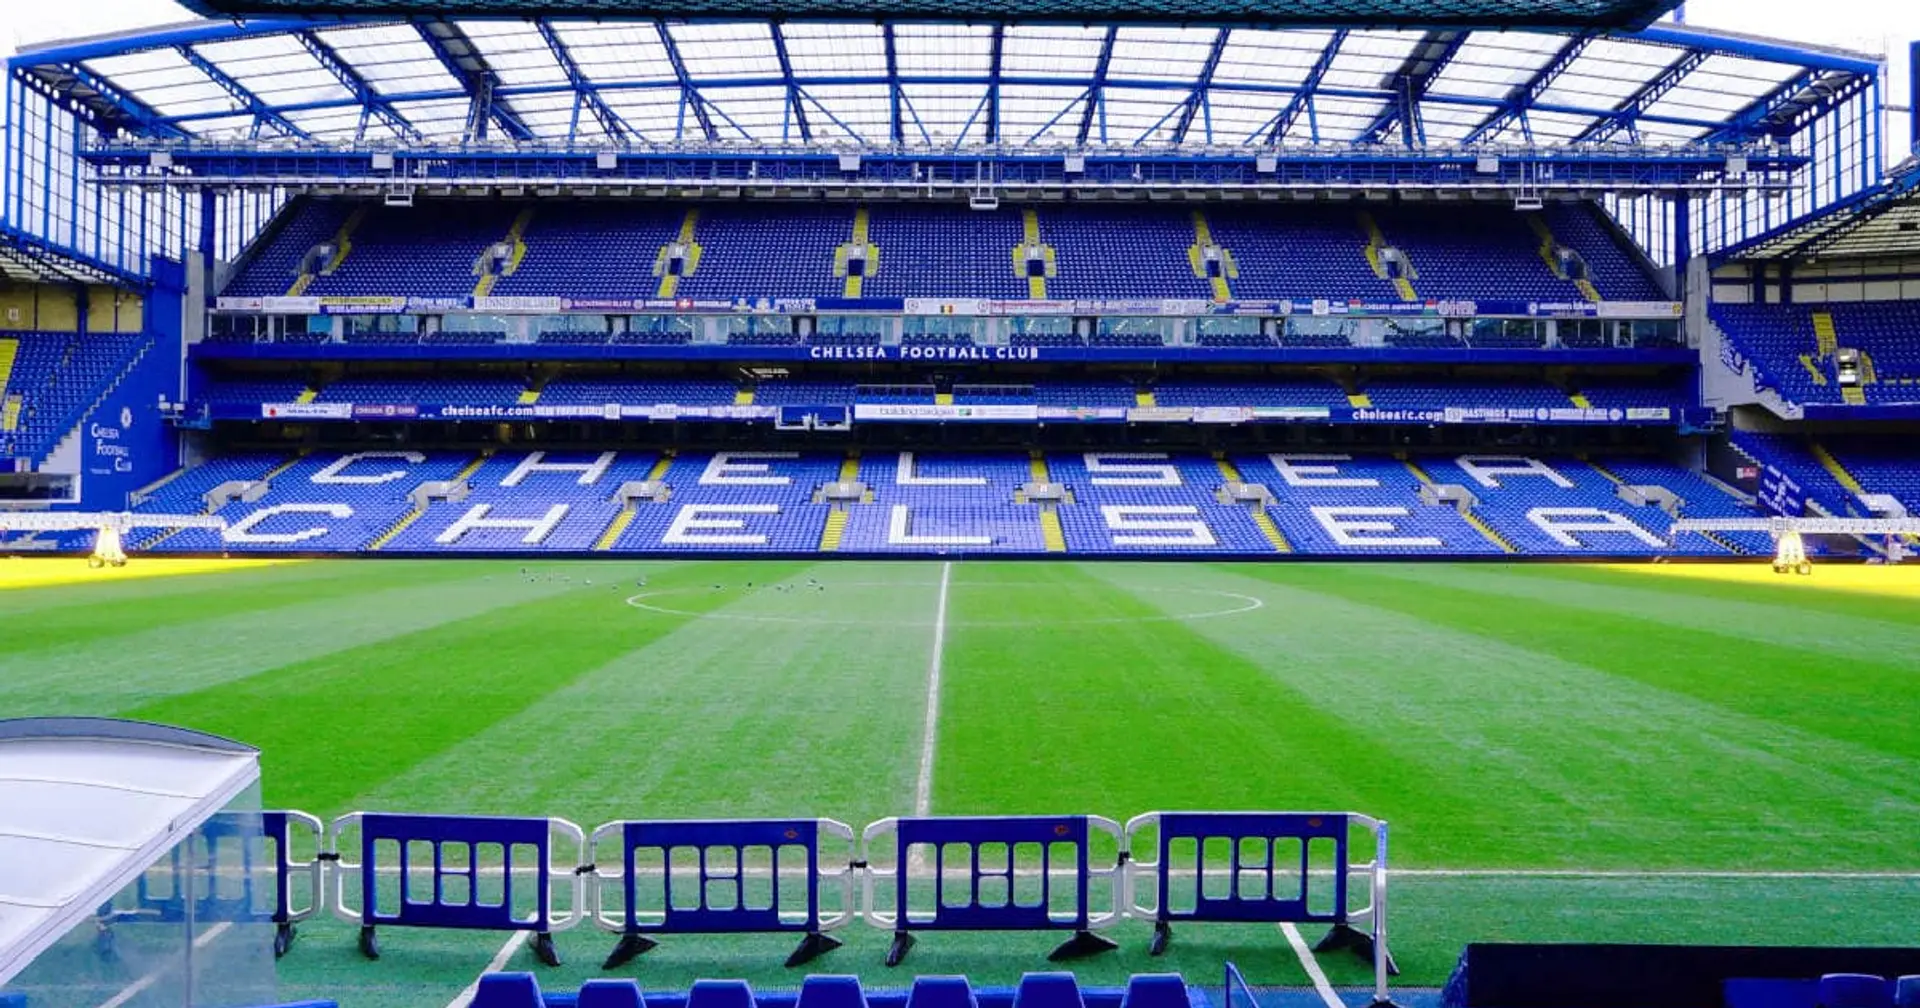 No more fans at Stamford Bridge as London is moved to Tier 3